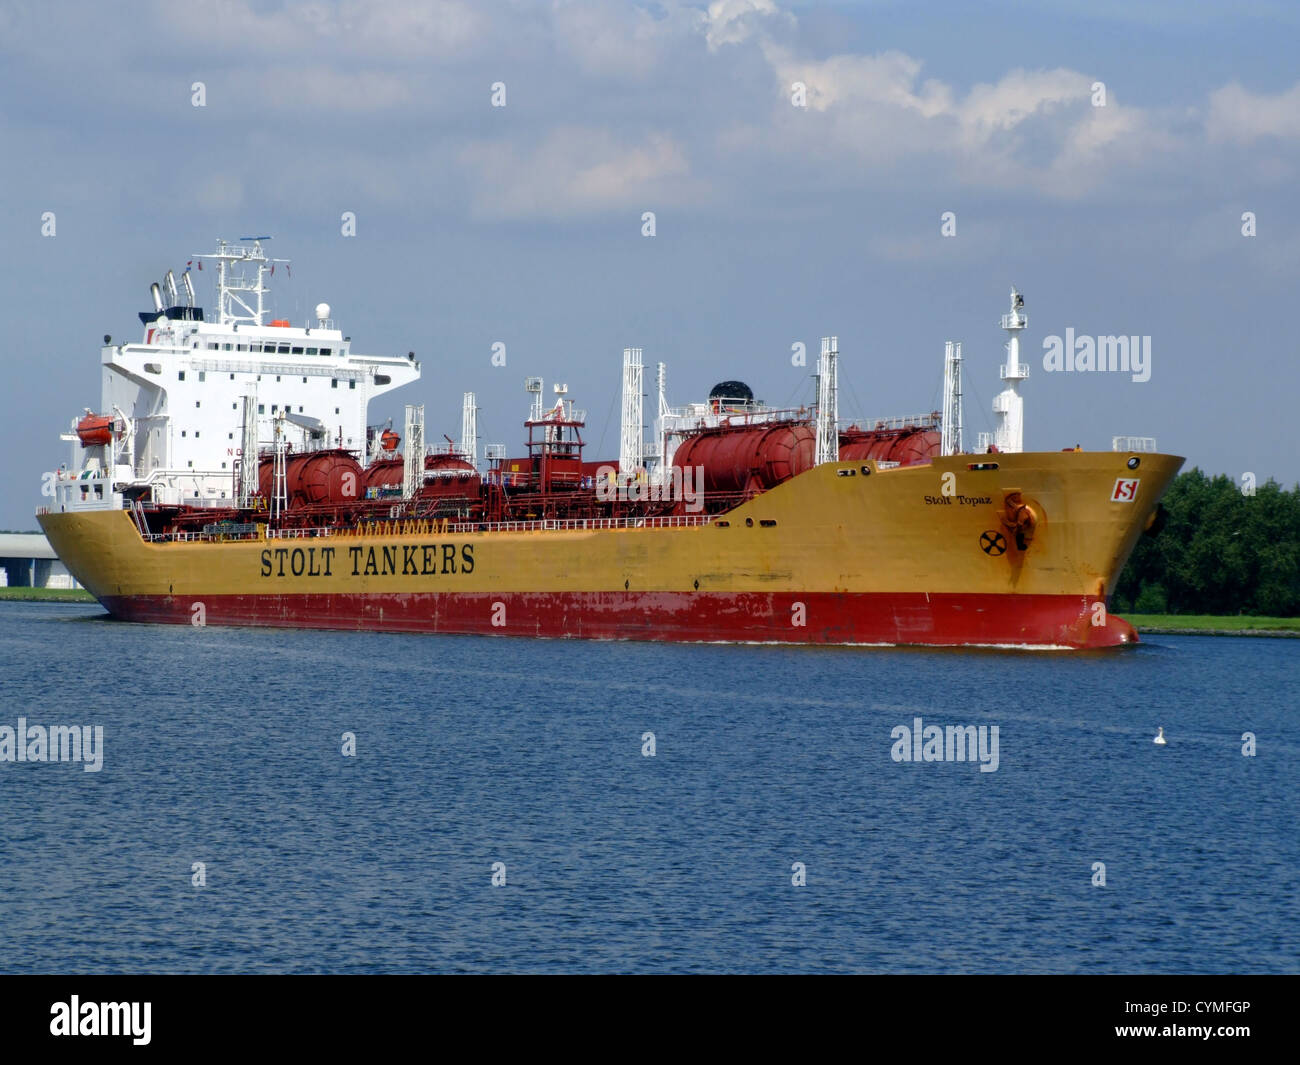 Stolt Sea High Resolution Stock Photography and - Alamy